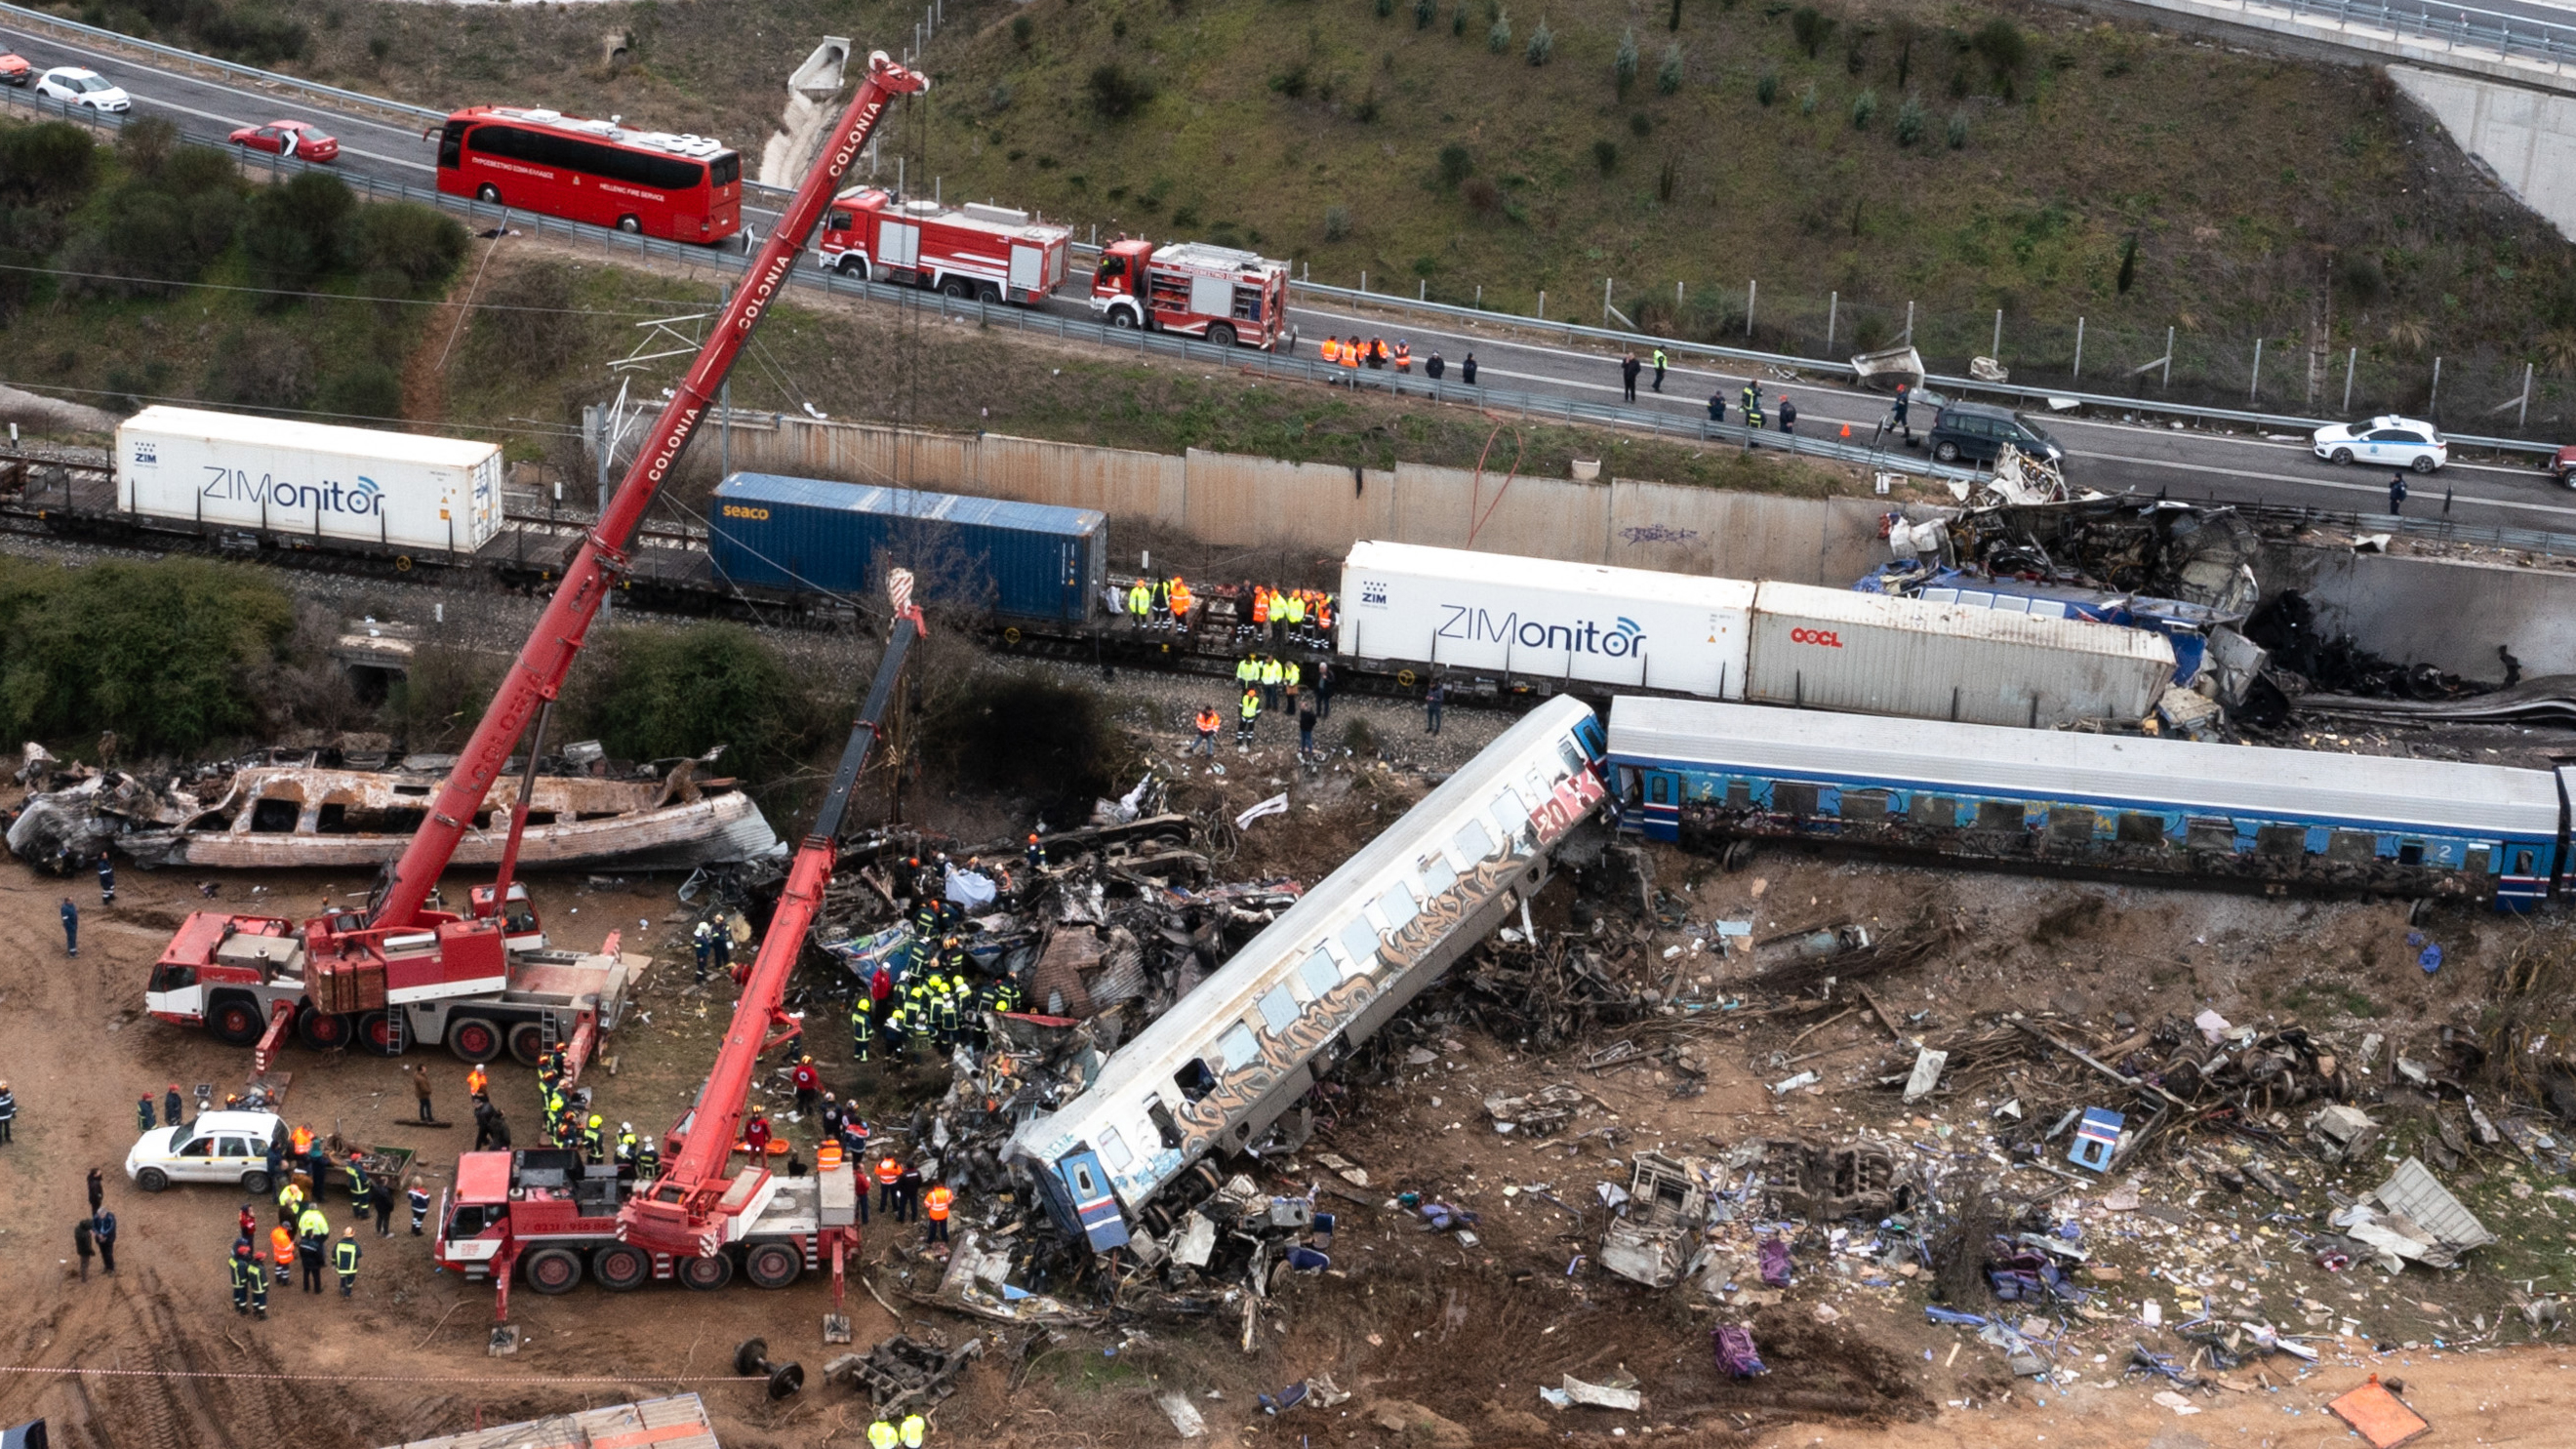 Fatal Aftermath of the Greece Train Crash in Photos